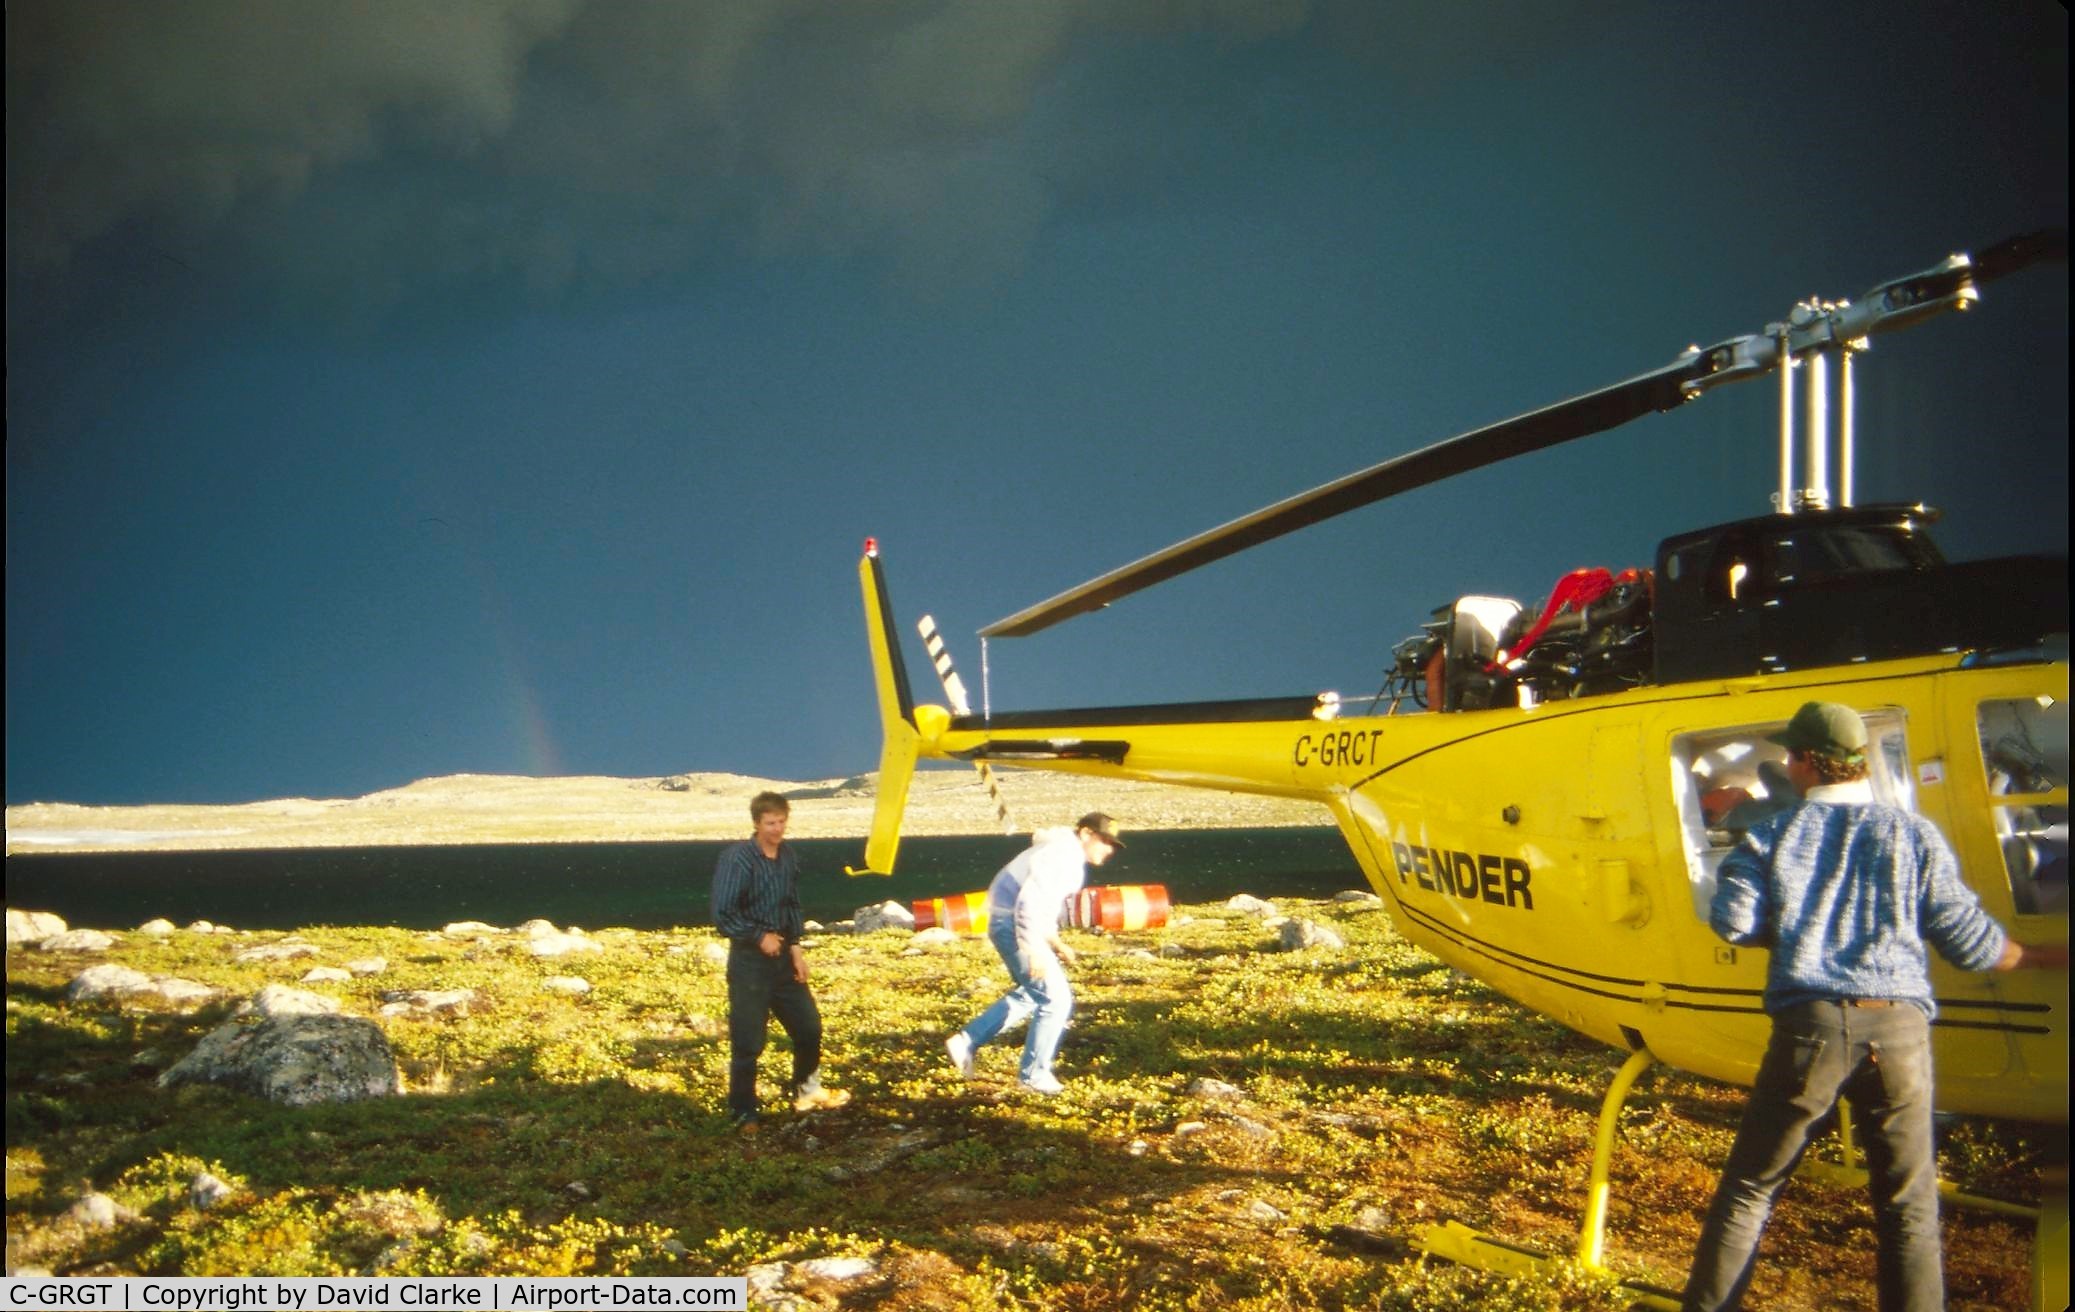 C-GRGT, 1975 Bell 206B C/N 1688, Summer 1988, Canadian Arctic, C-GRGT supporting gold exploration program. Dark skies are from an approaching squall.